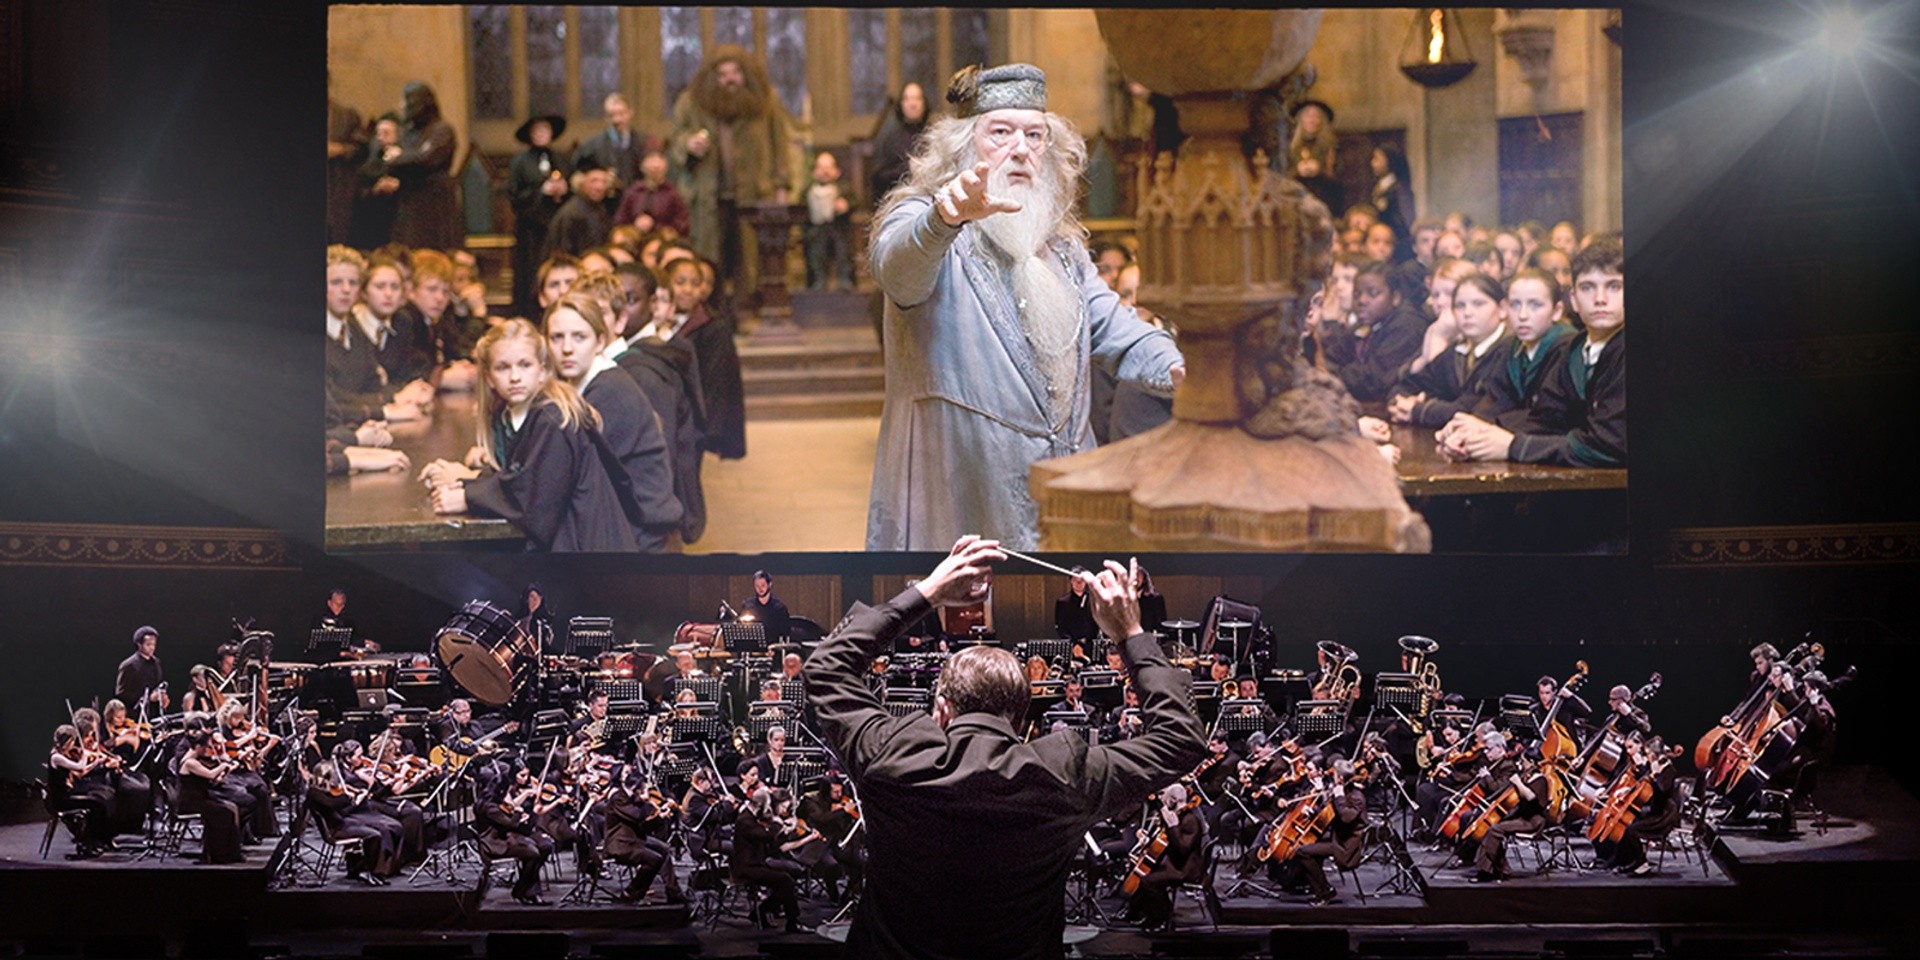 Harry Potter and the Prisoner of Azkaban gets the concert treatment in Singapore